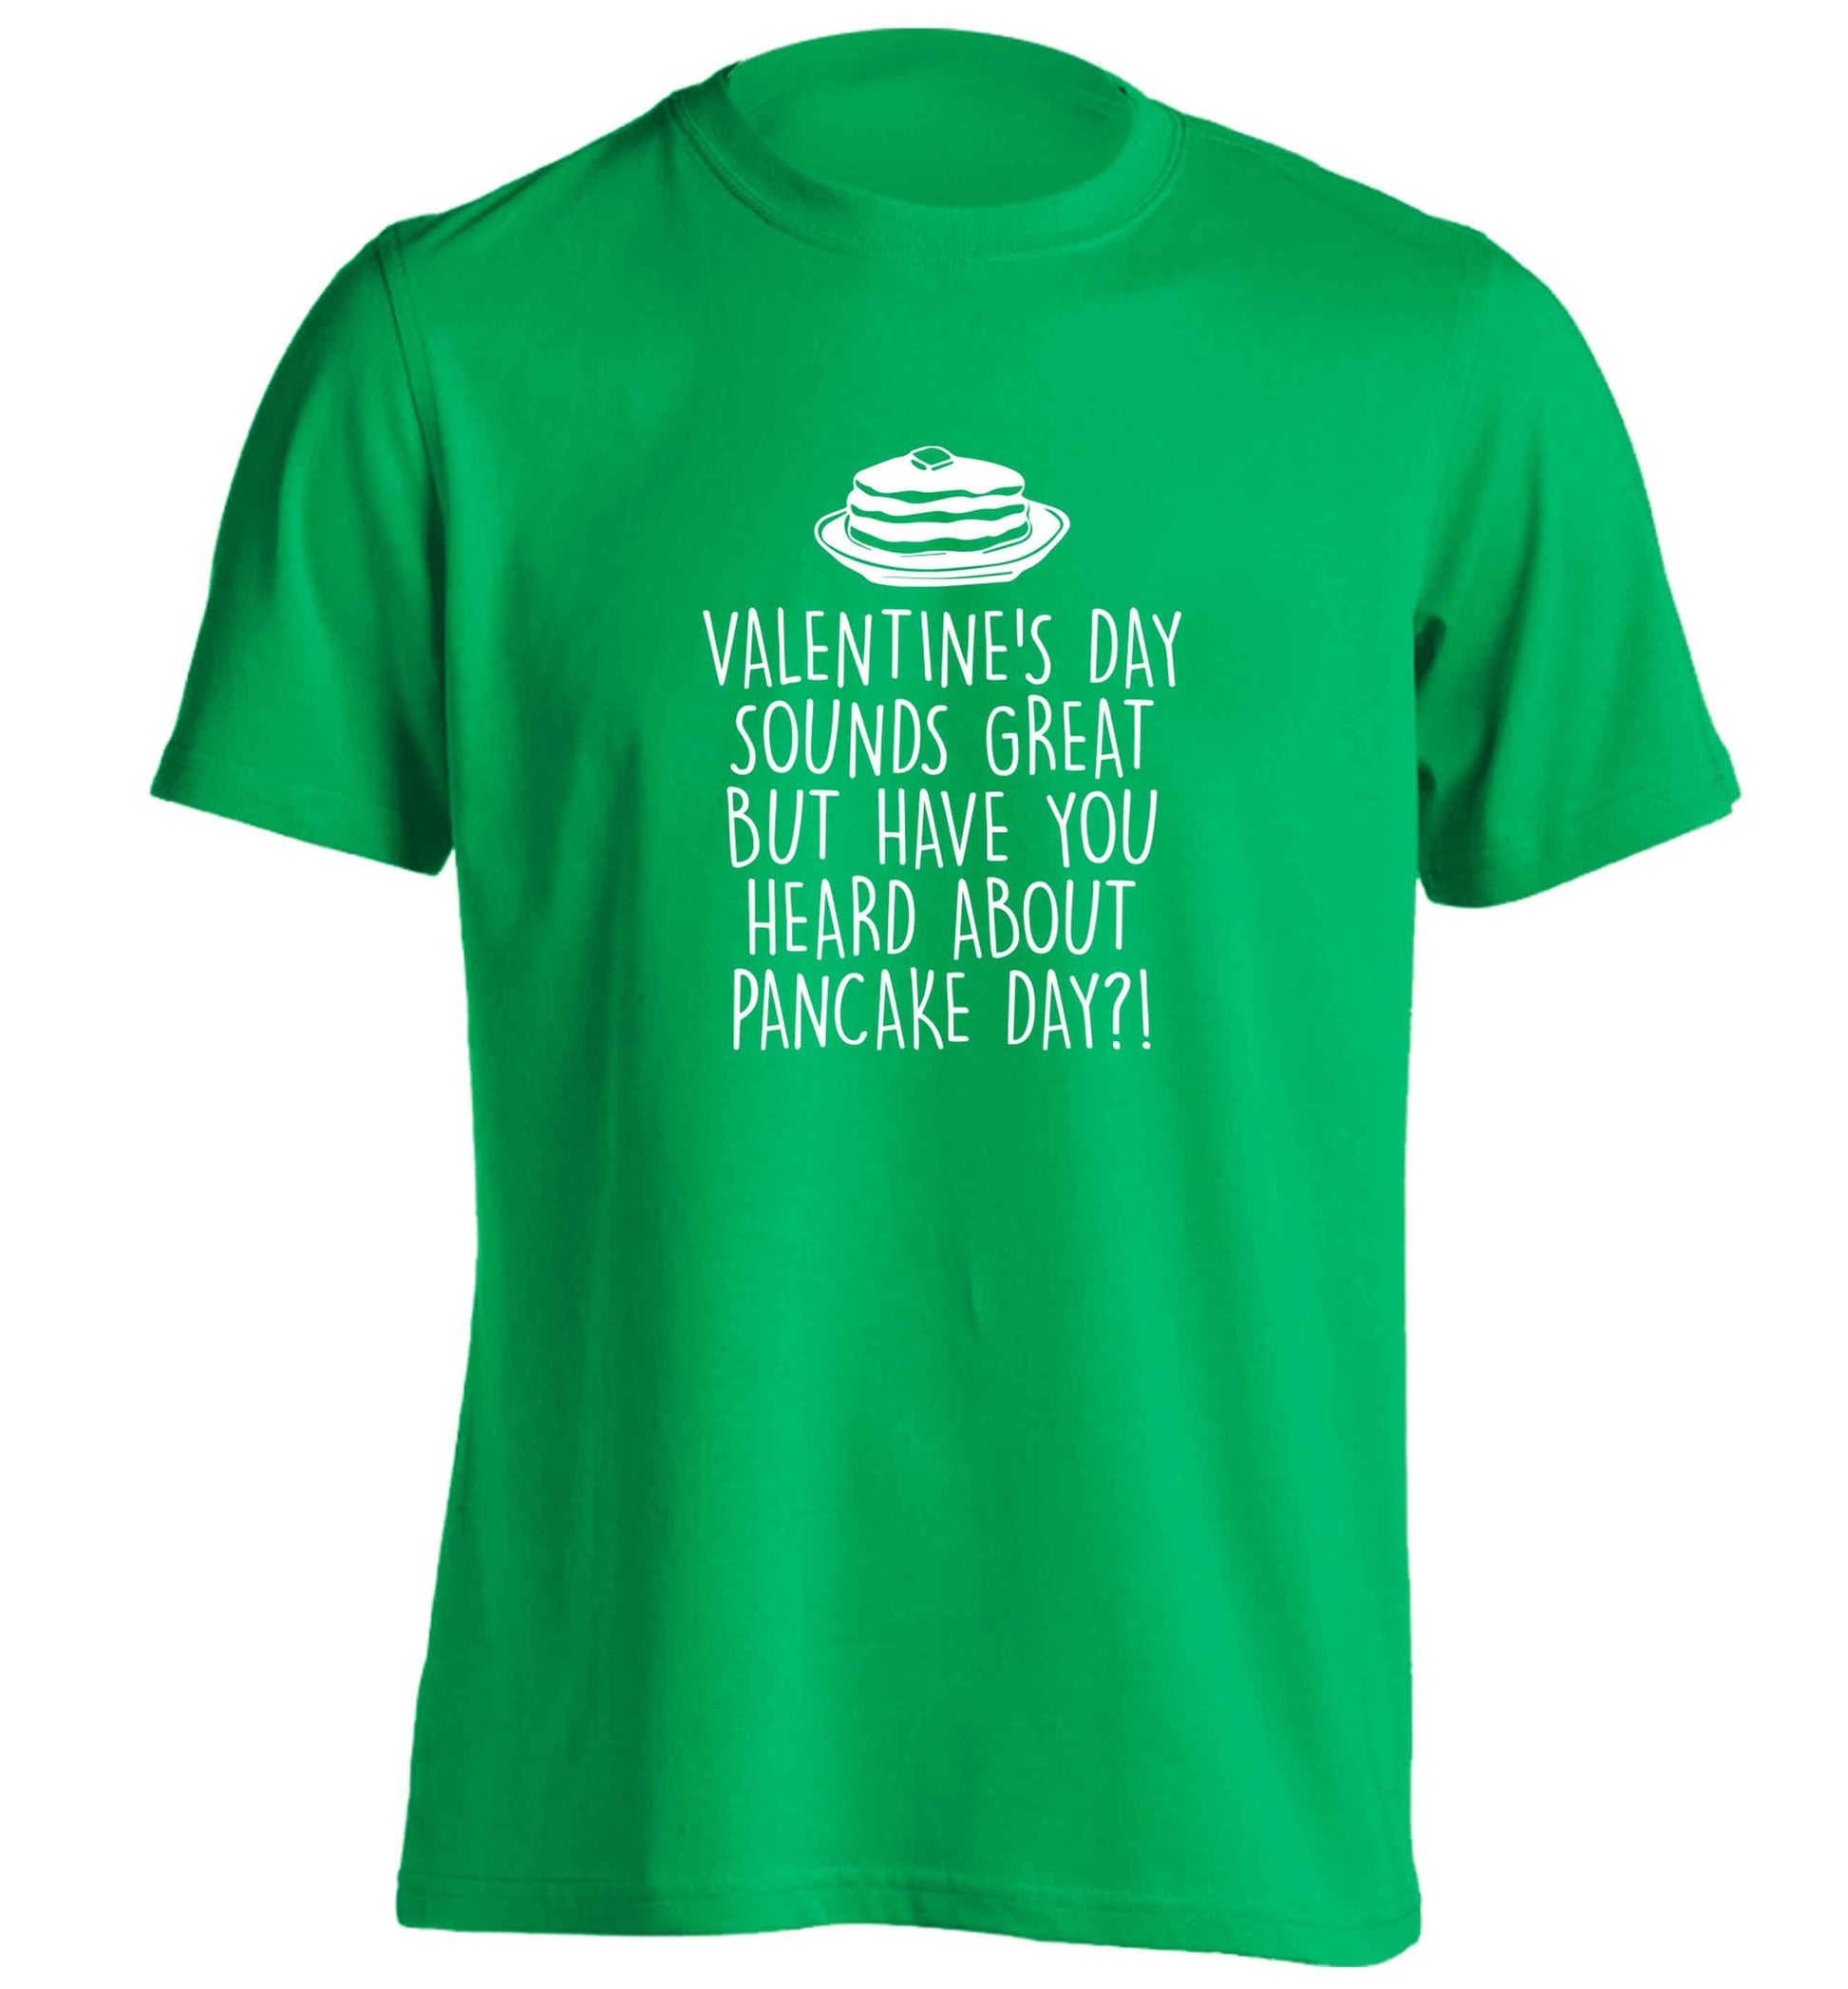 Valentine's day sounds great but have you heard about pancake day?! adults unisex green Tshirt 2XL